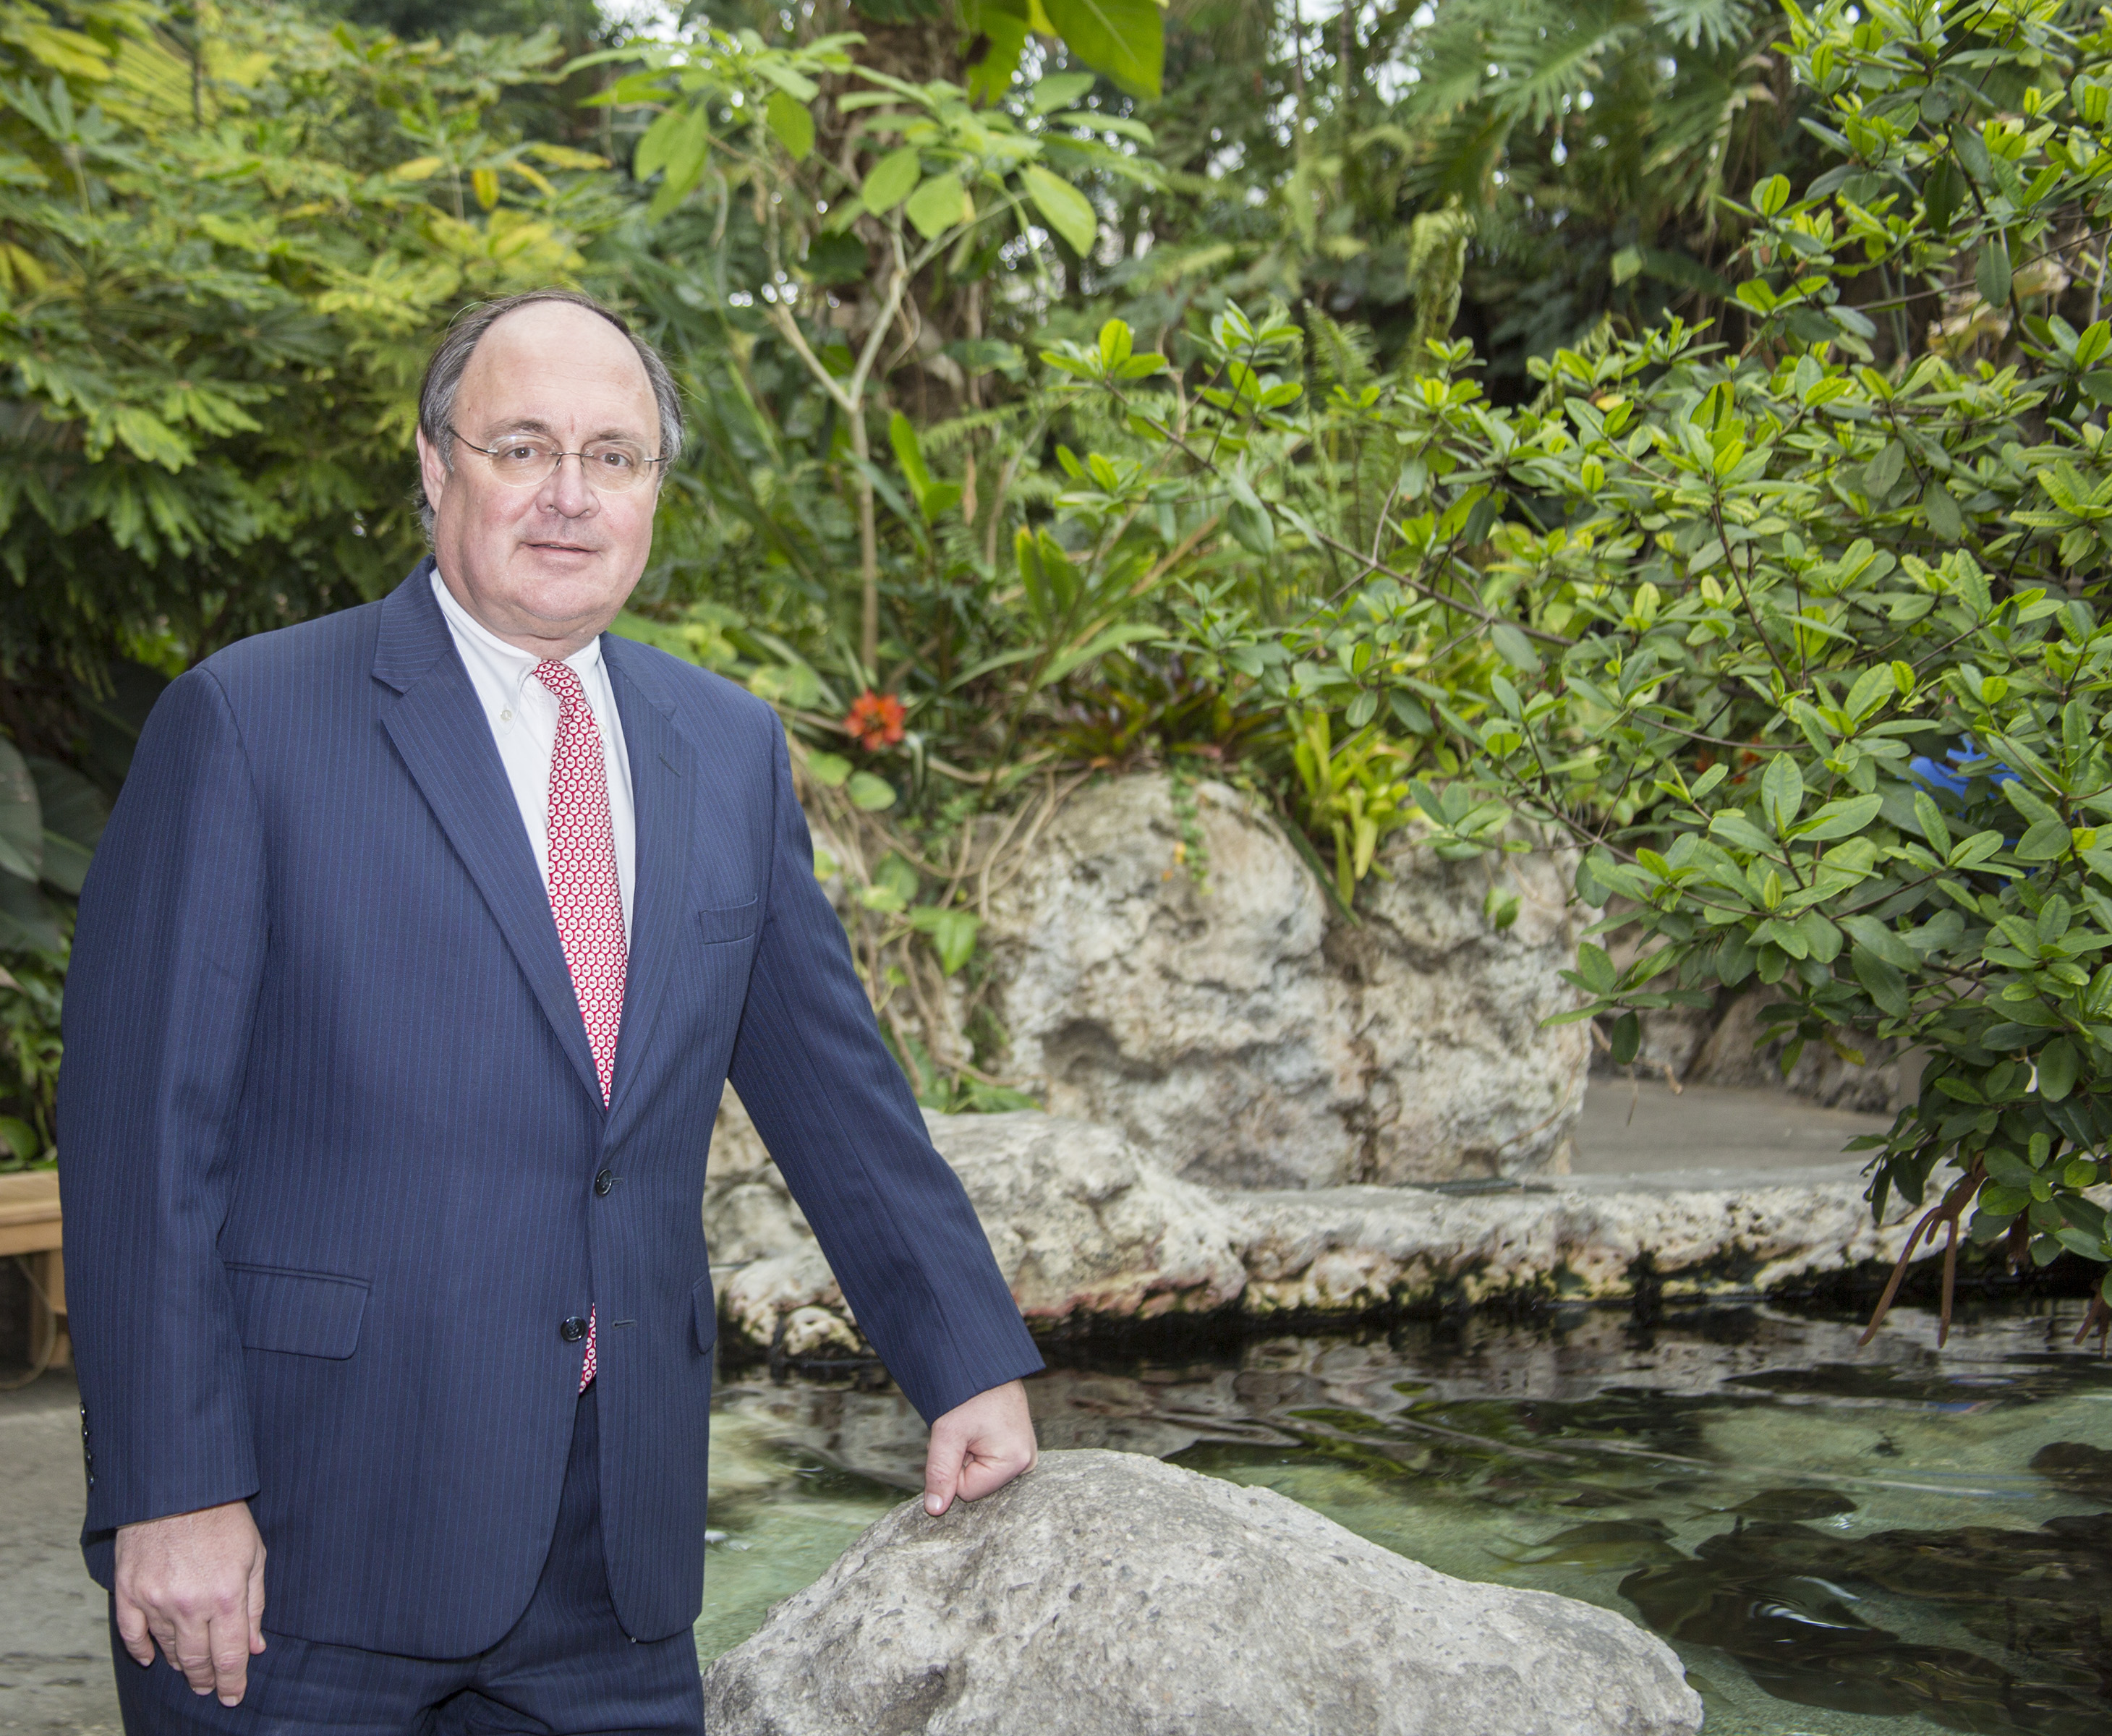 Keith Sanford becomes the fourth president and CEO of the Tennessee Aquarium